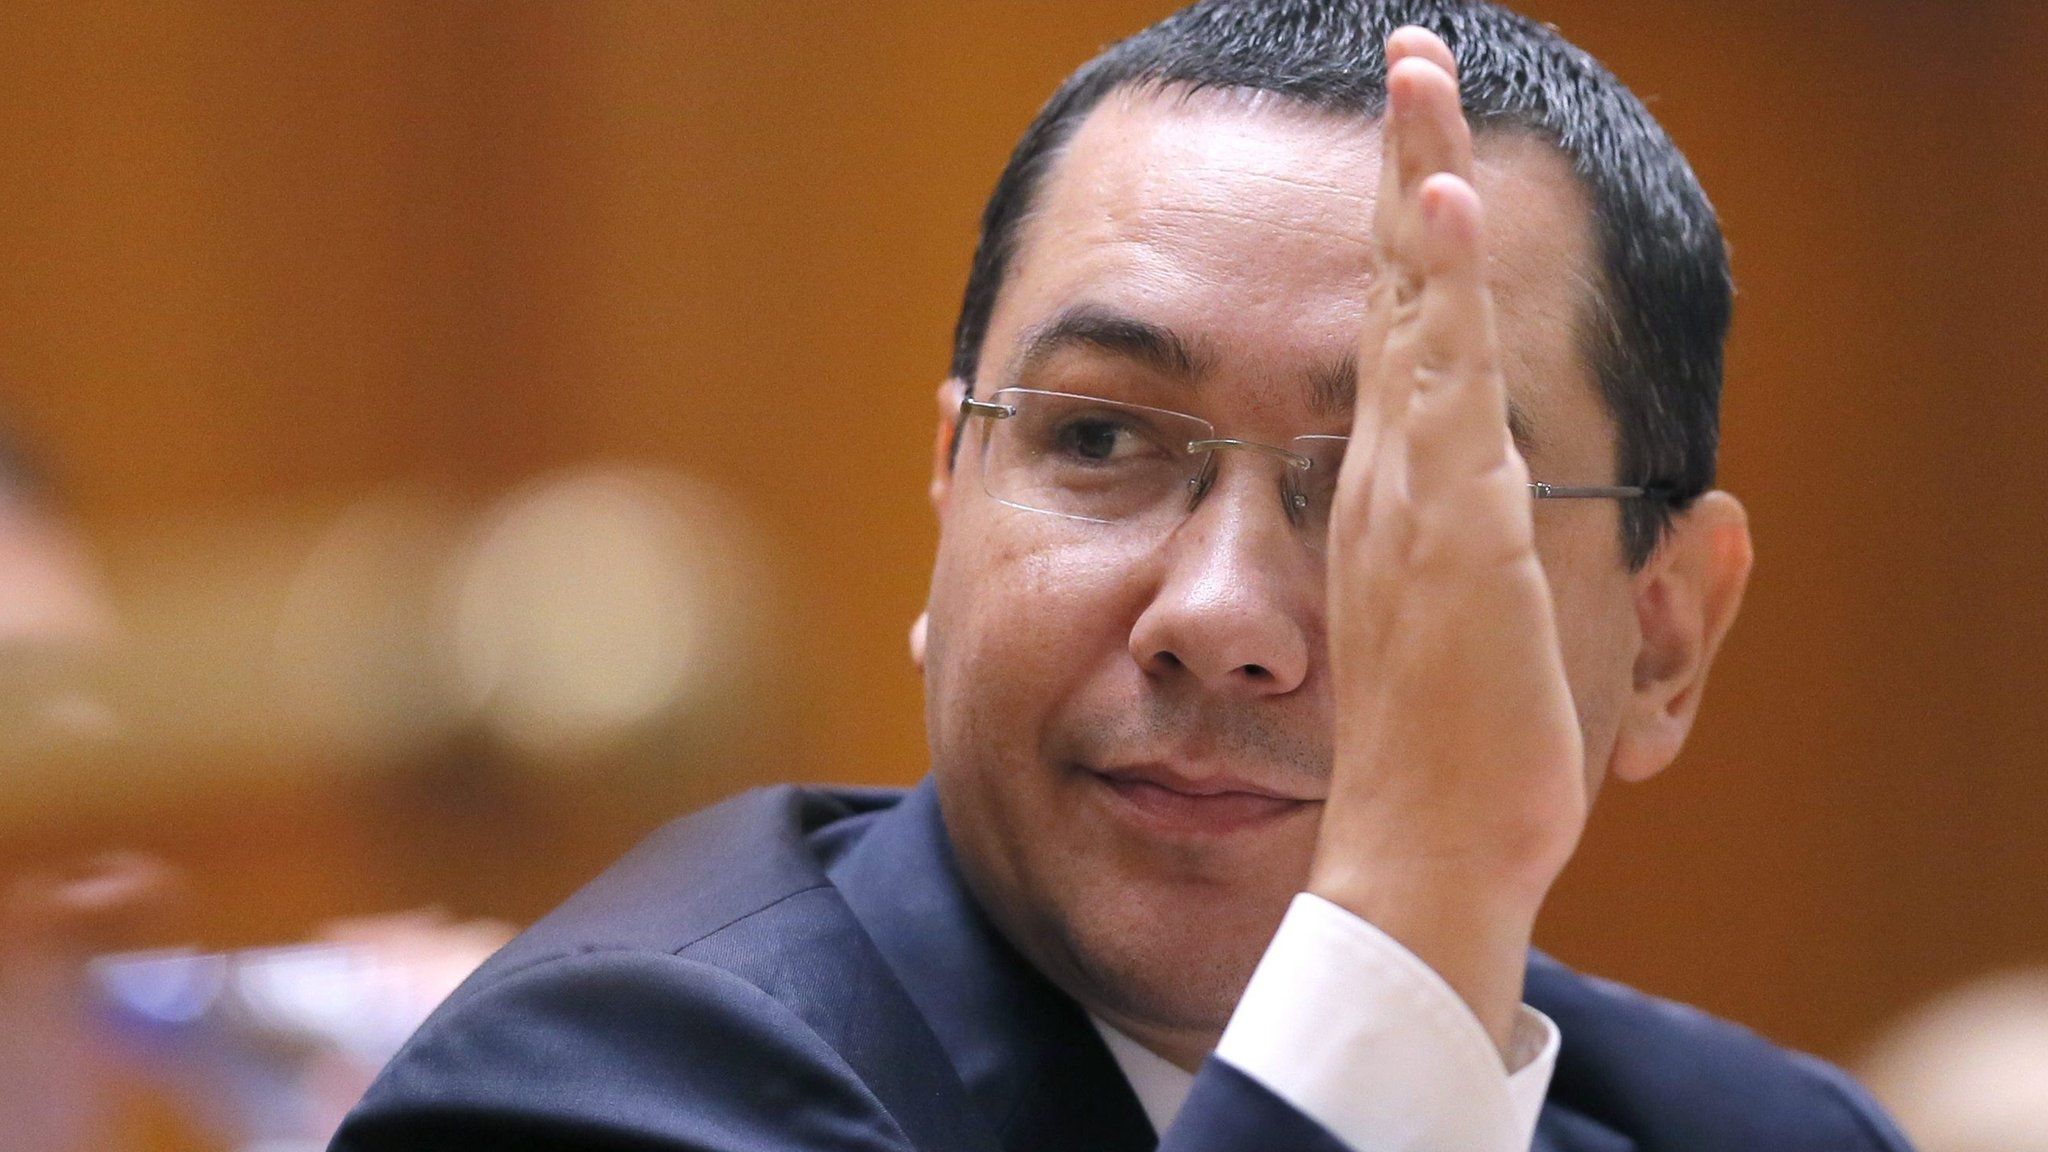 Romanian Prime Minister Victor Ponta raises his hand during a speech in front of both parliament chambers during no-confidence motion procedures